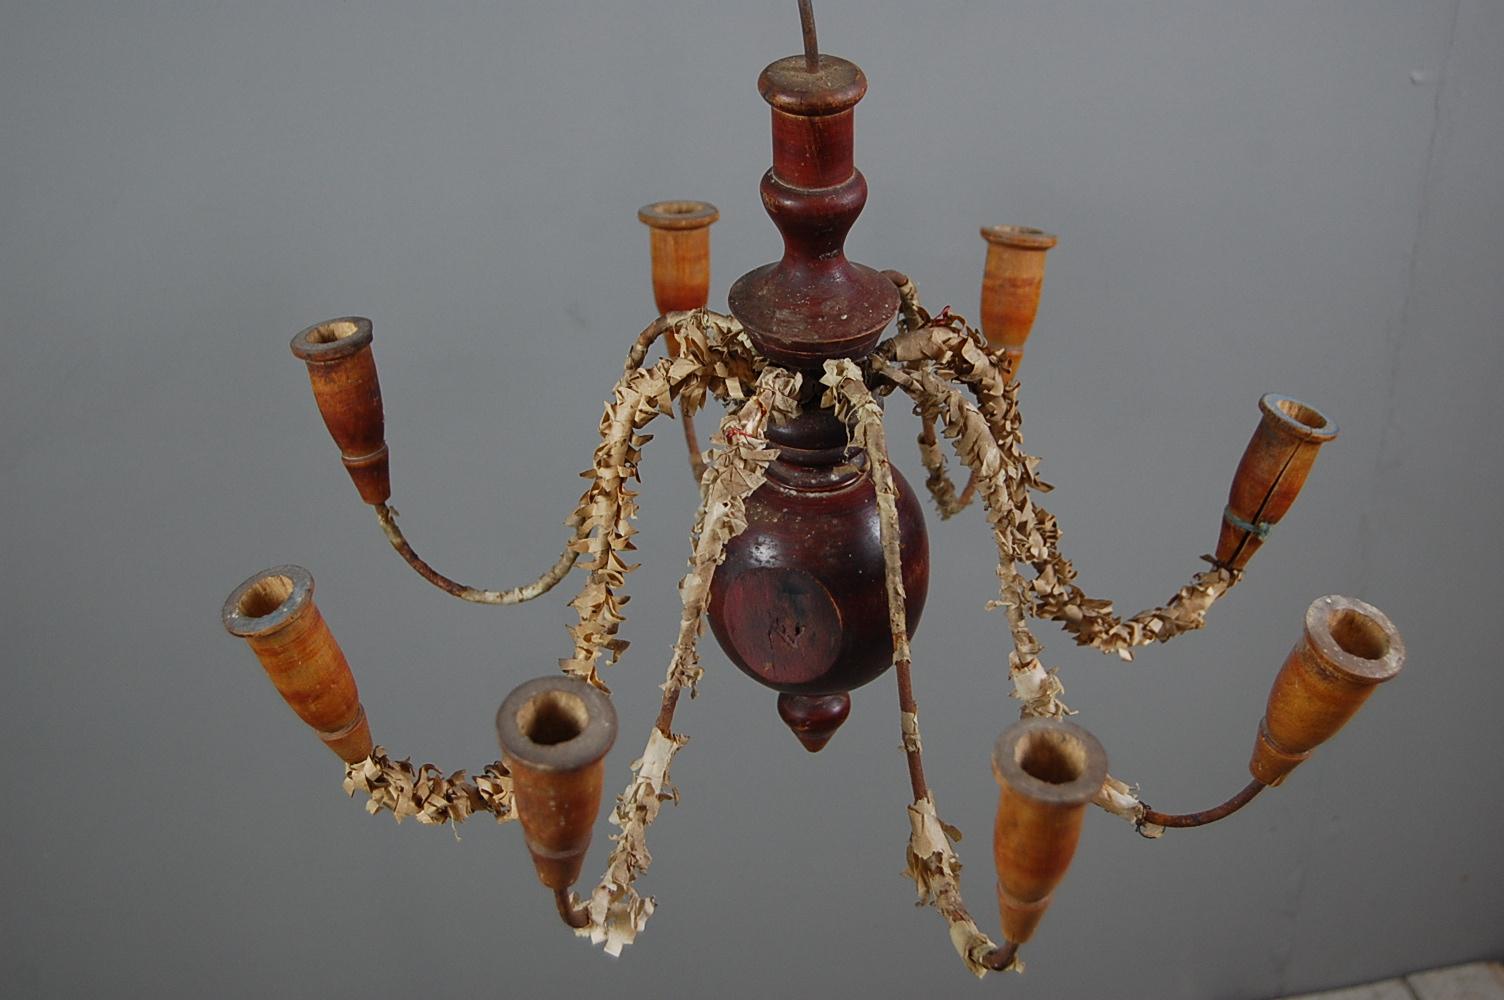 Southern Swedish chandelier, painted turned wood and iron. The fine and delicate nature of this example lead us to believe this originates from Southern Sweden. The iron arms have tissue paper decoration, which could easily be removed if required.